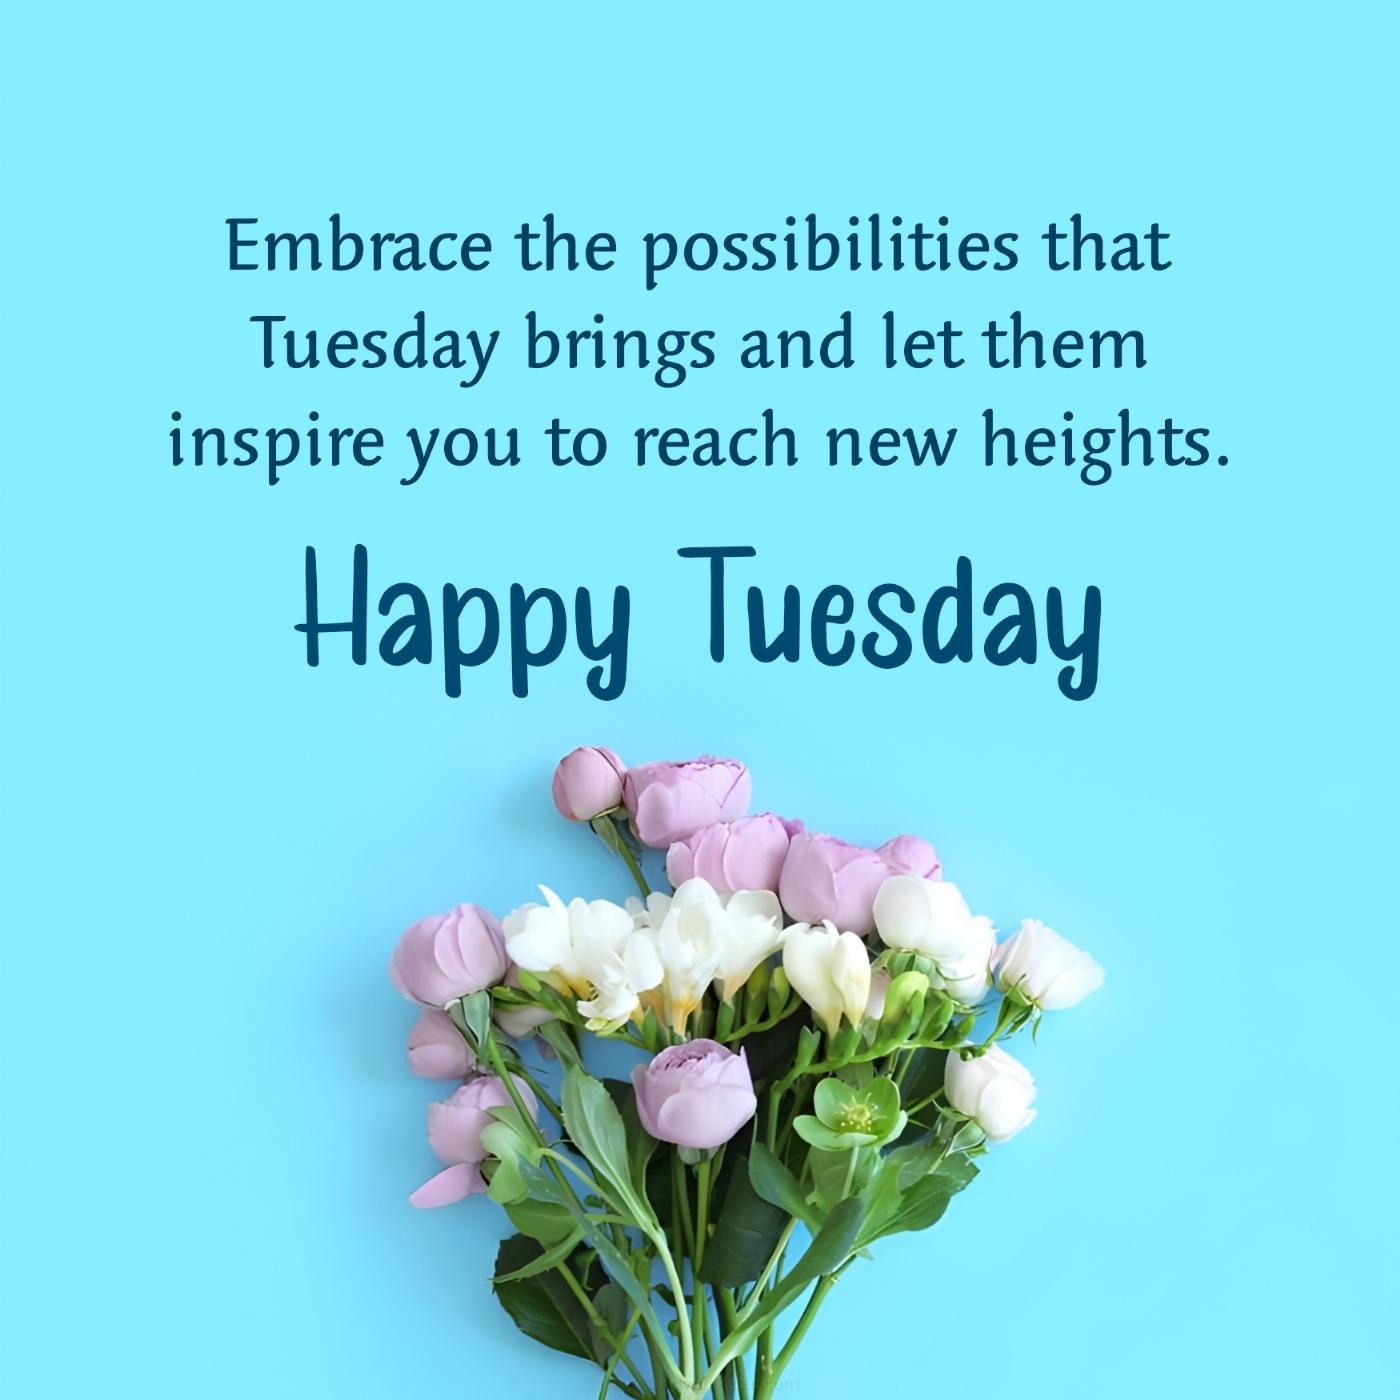 Embrace the possibilities that Tuesday brings and let them inspire you